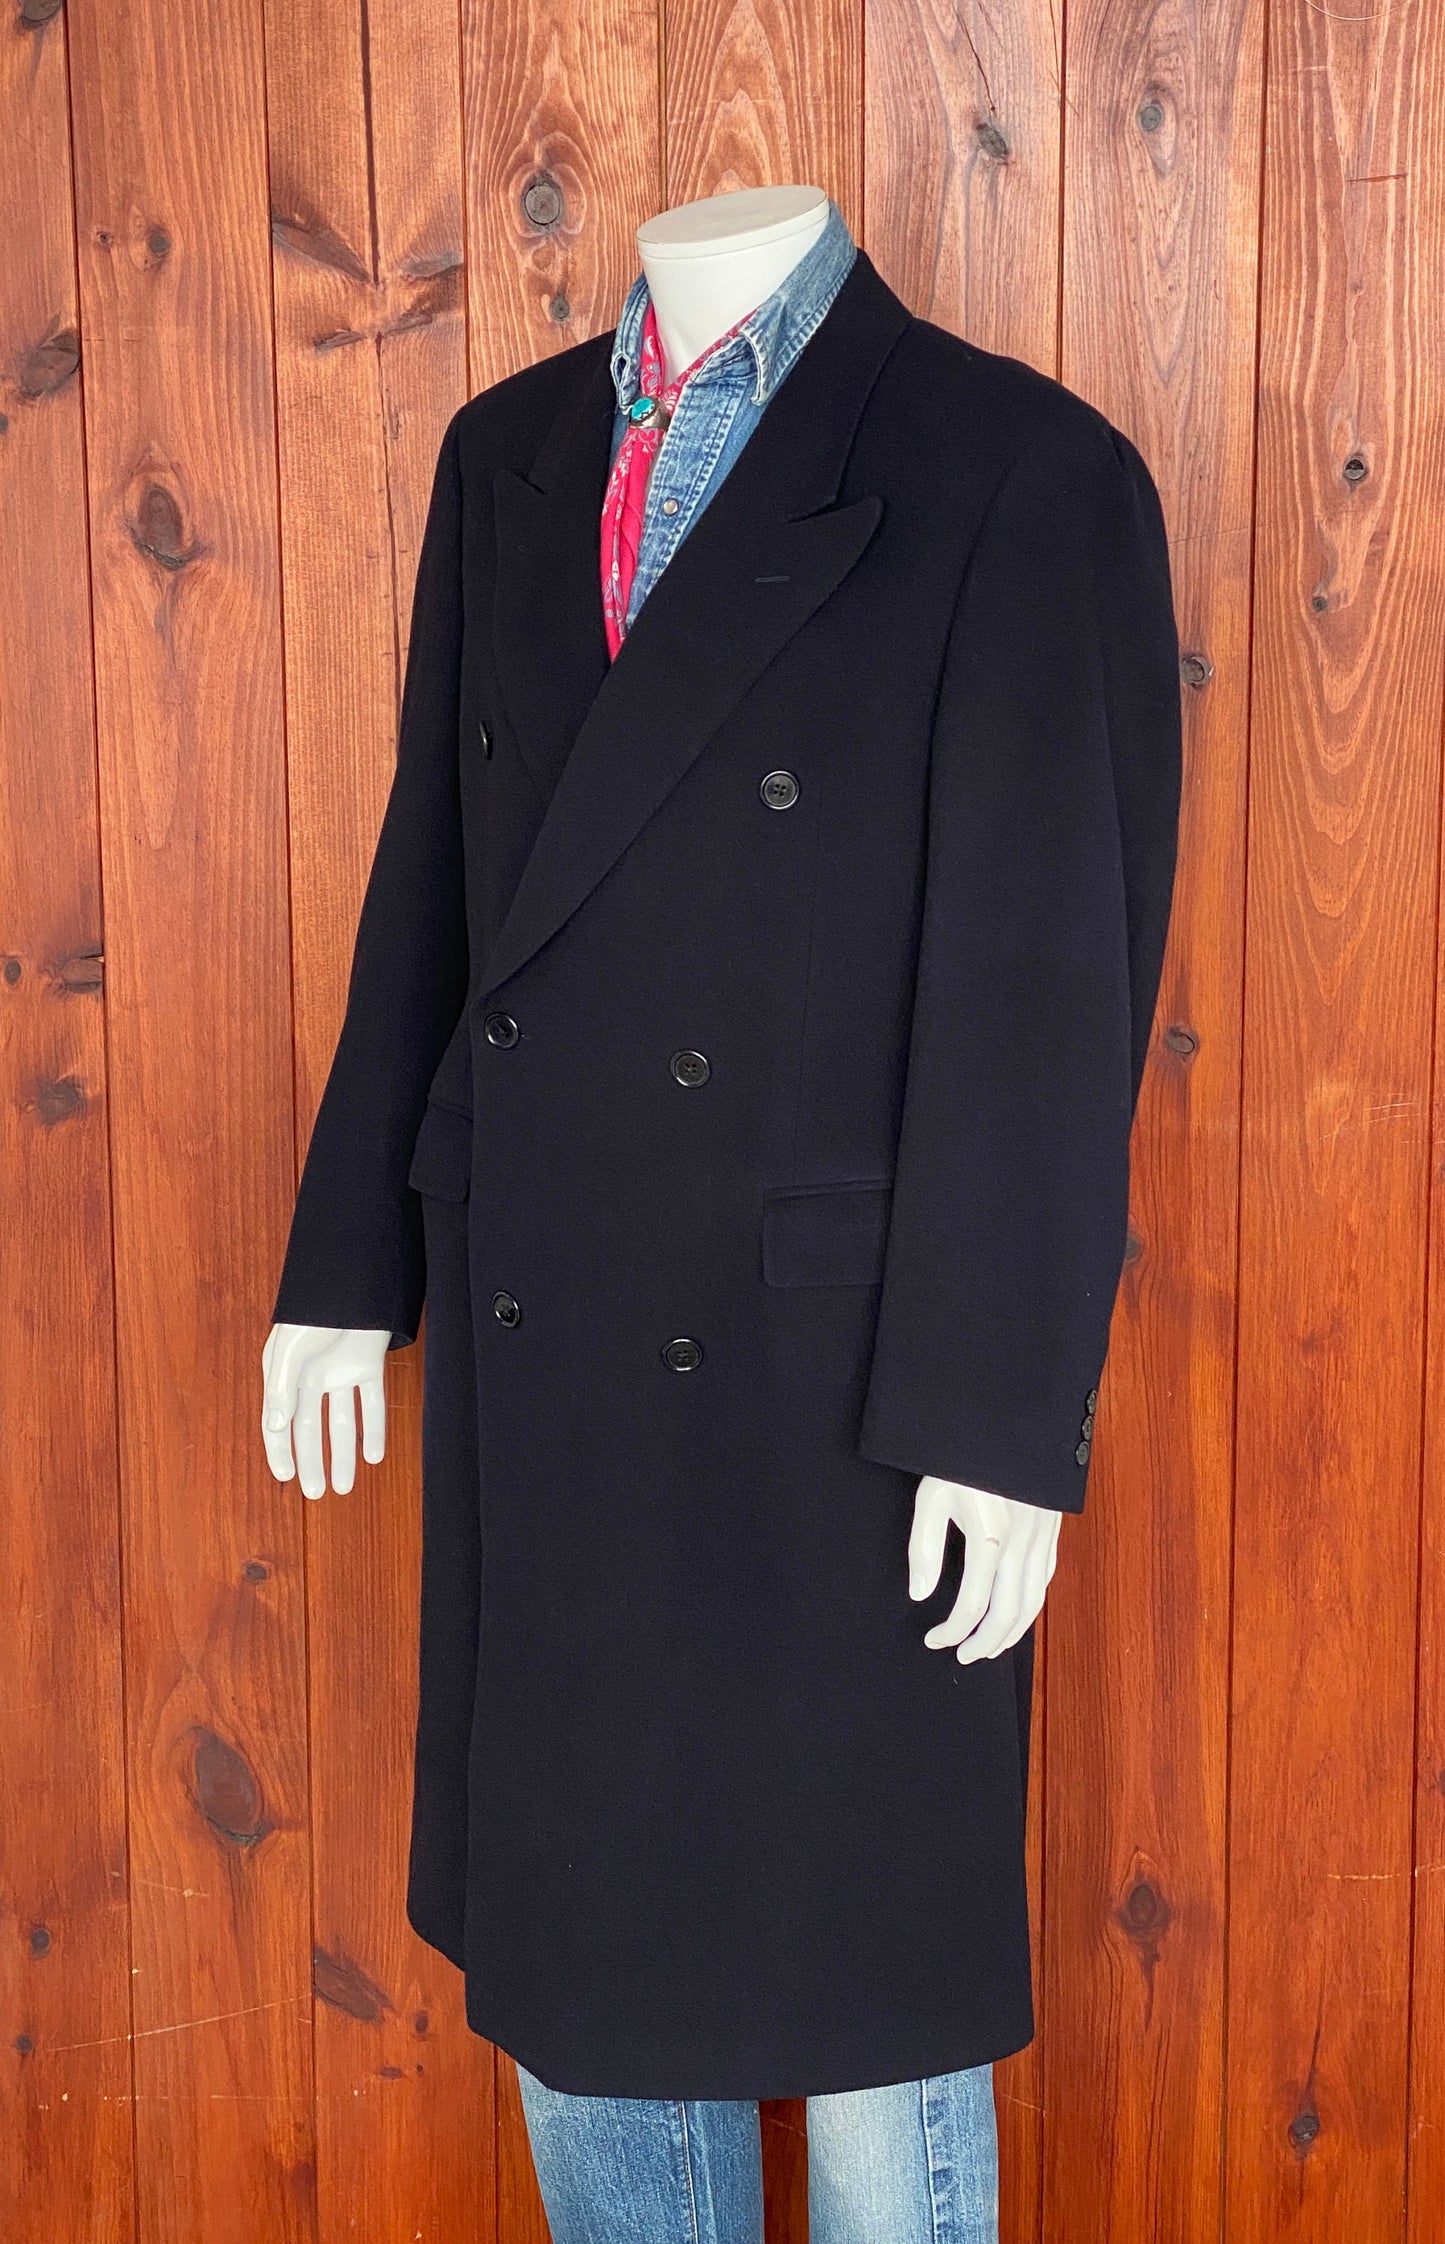 Vintage Burberrys Cashmere Double-Breasted Overcoat - Size 52 EU